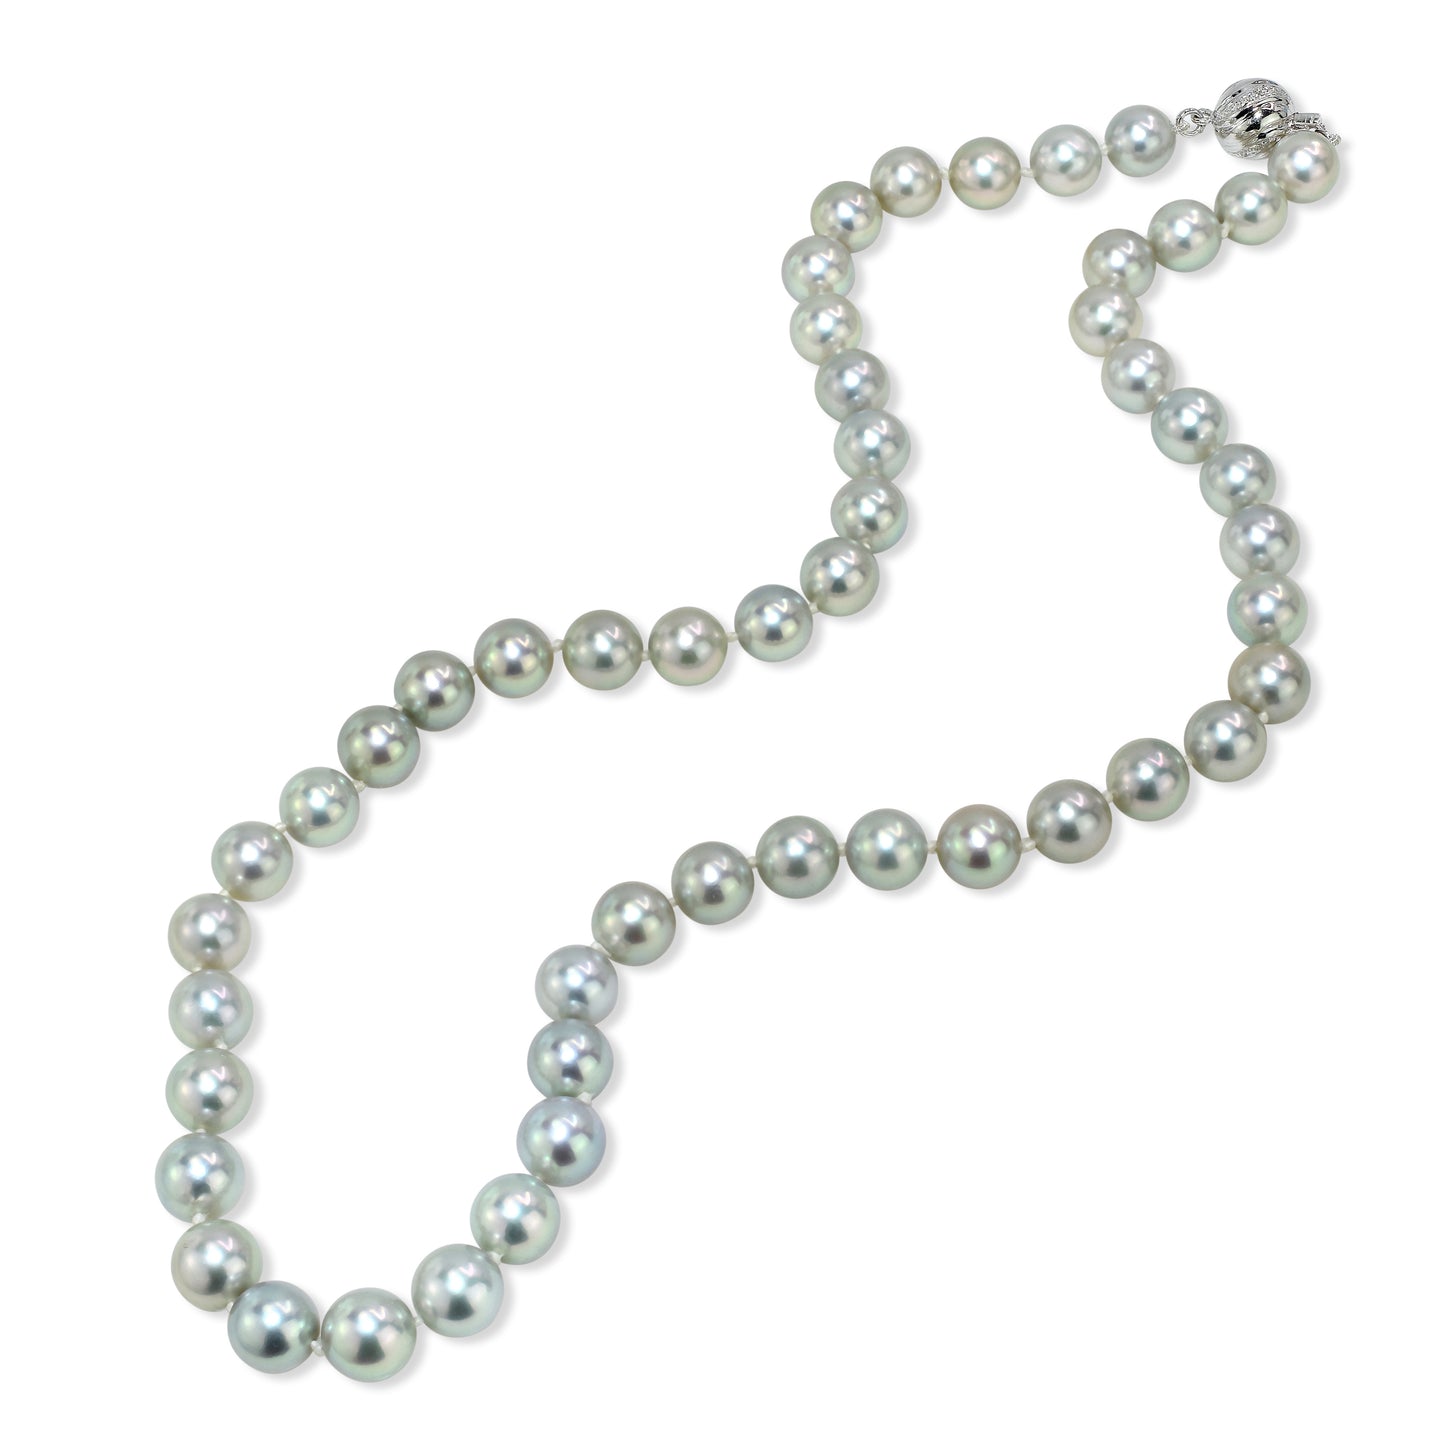 14KW Diamond Silver Grey Color Akoya Cultured Pearl Necklace 18"